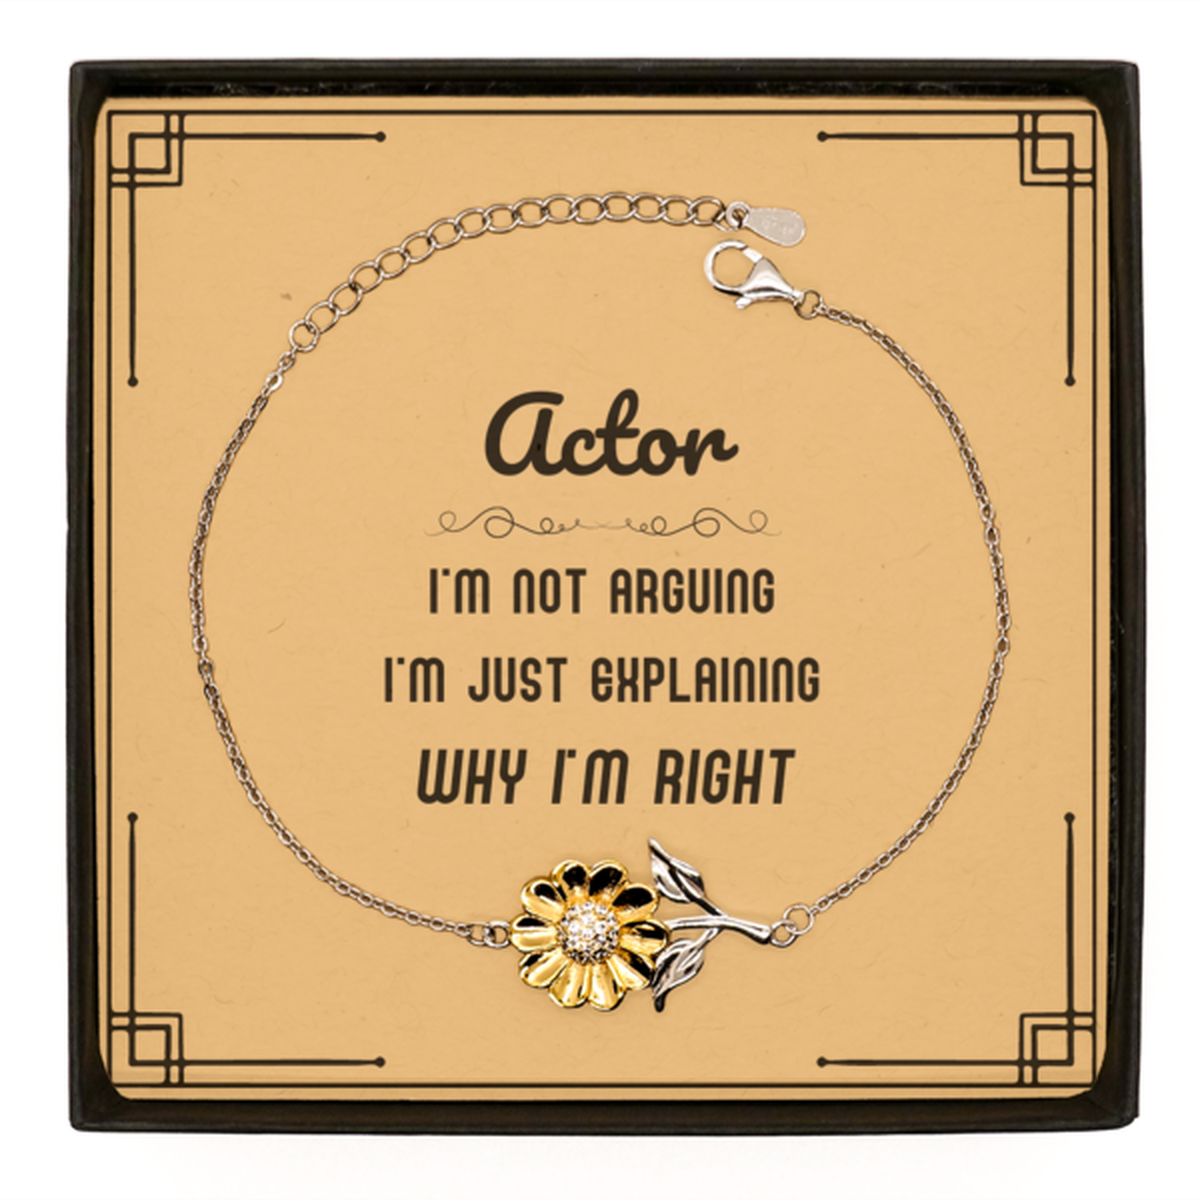 Actor I'm not Arguing. I'm Just Explaining Why I'm RIGHT Sunflower Bracelet, Funny Saying Quote Actor Gifts For Actor Message Card Graduation Birthday Christmas Gifts for Men Women Coworker